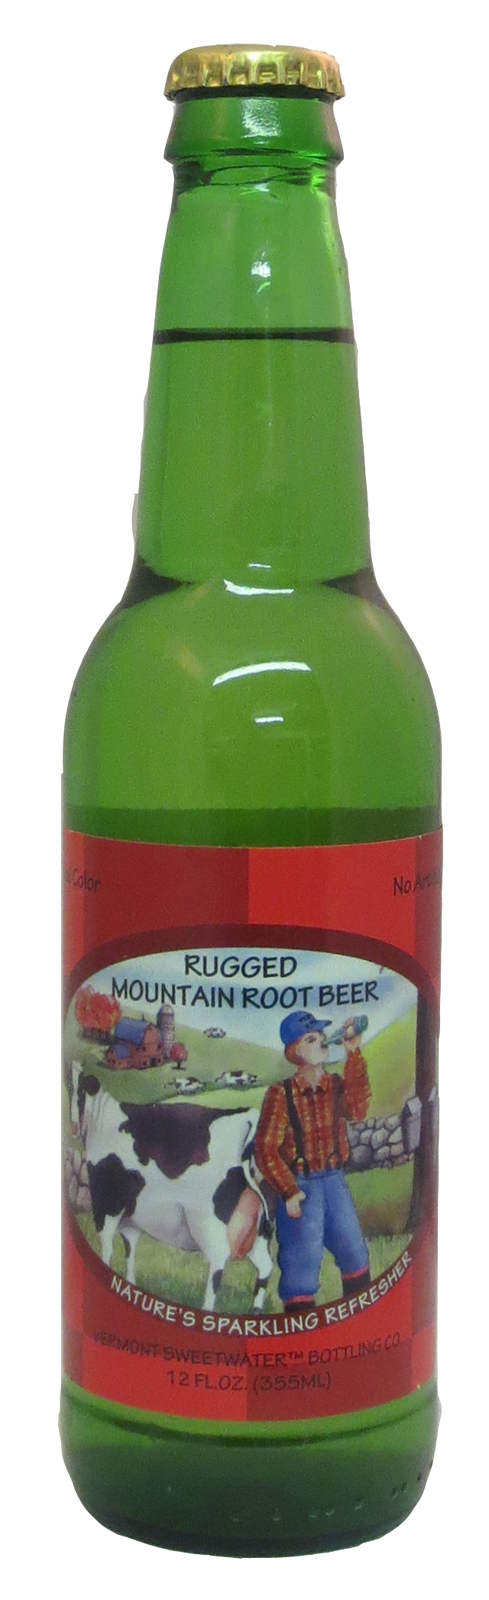 Vermont Sweetwater Rugged Mountain Root Beer